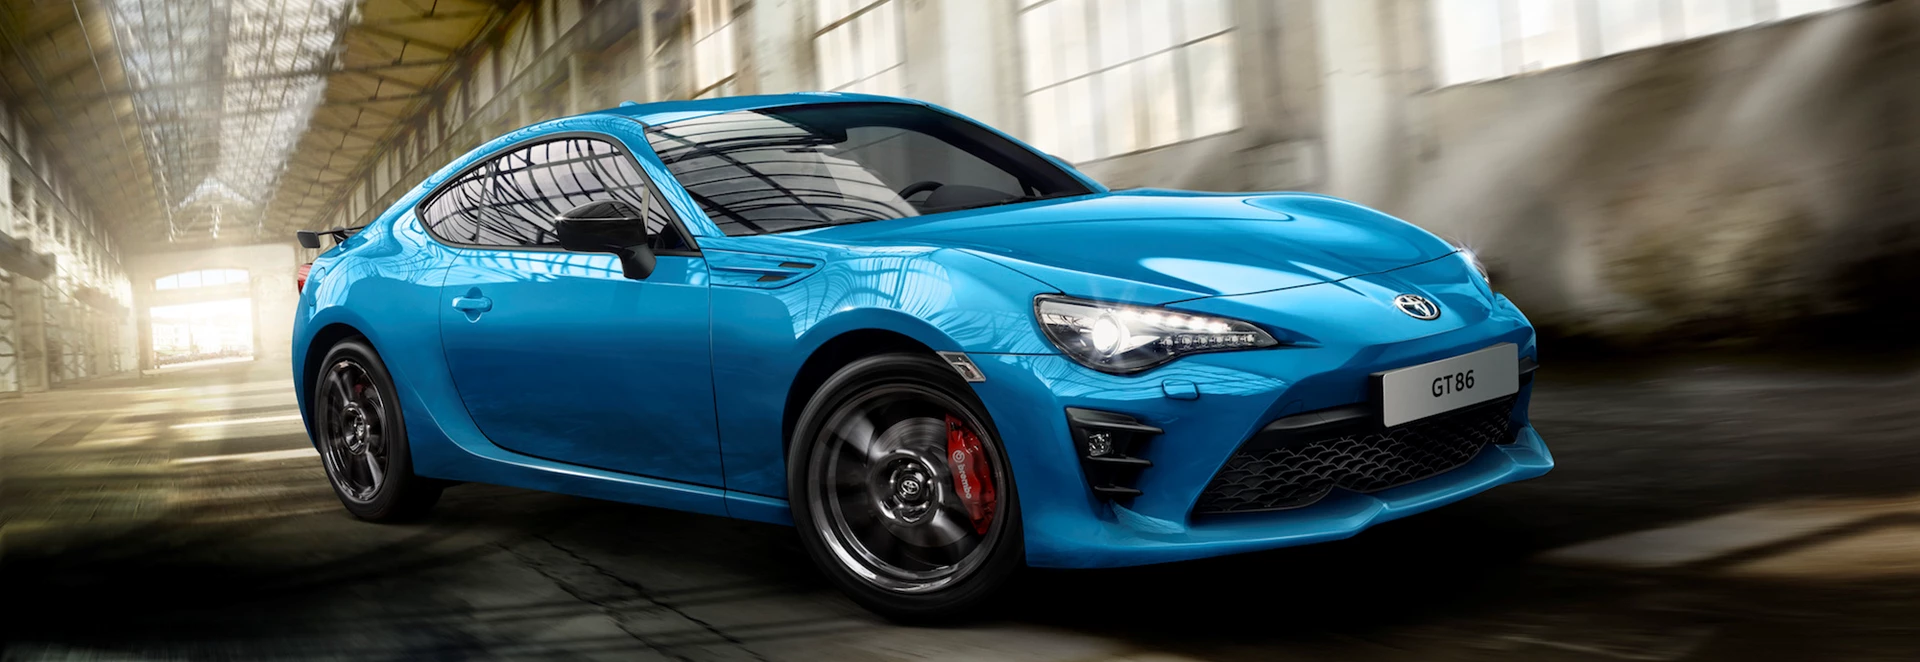 Toyota unveils Blue Edition for GT86 coupe 